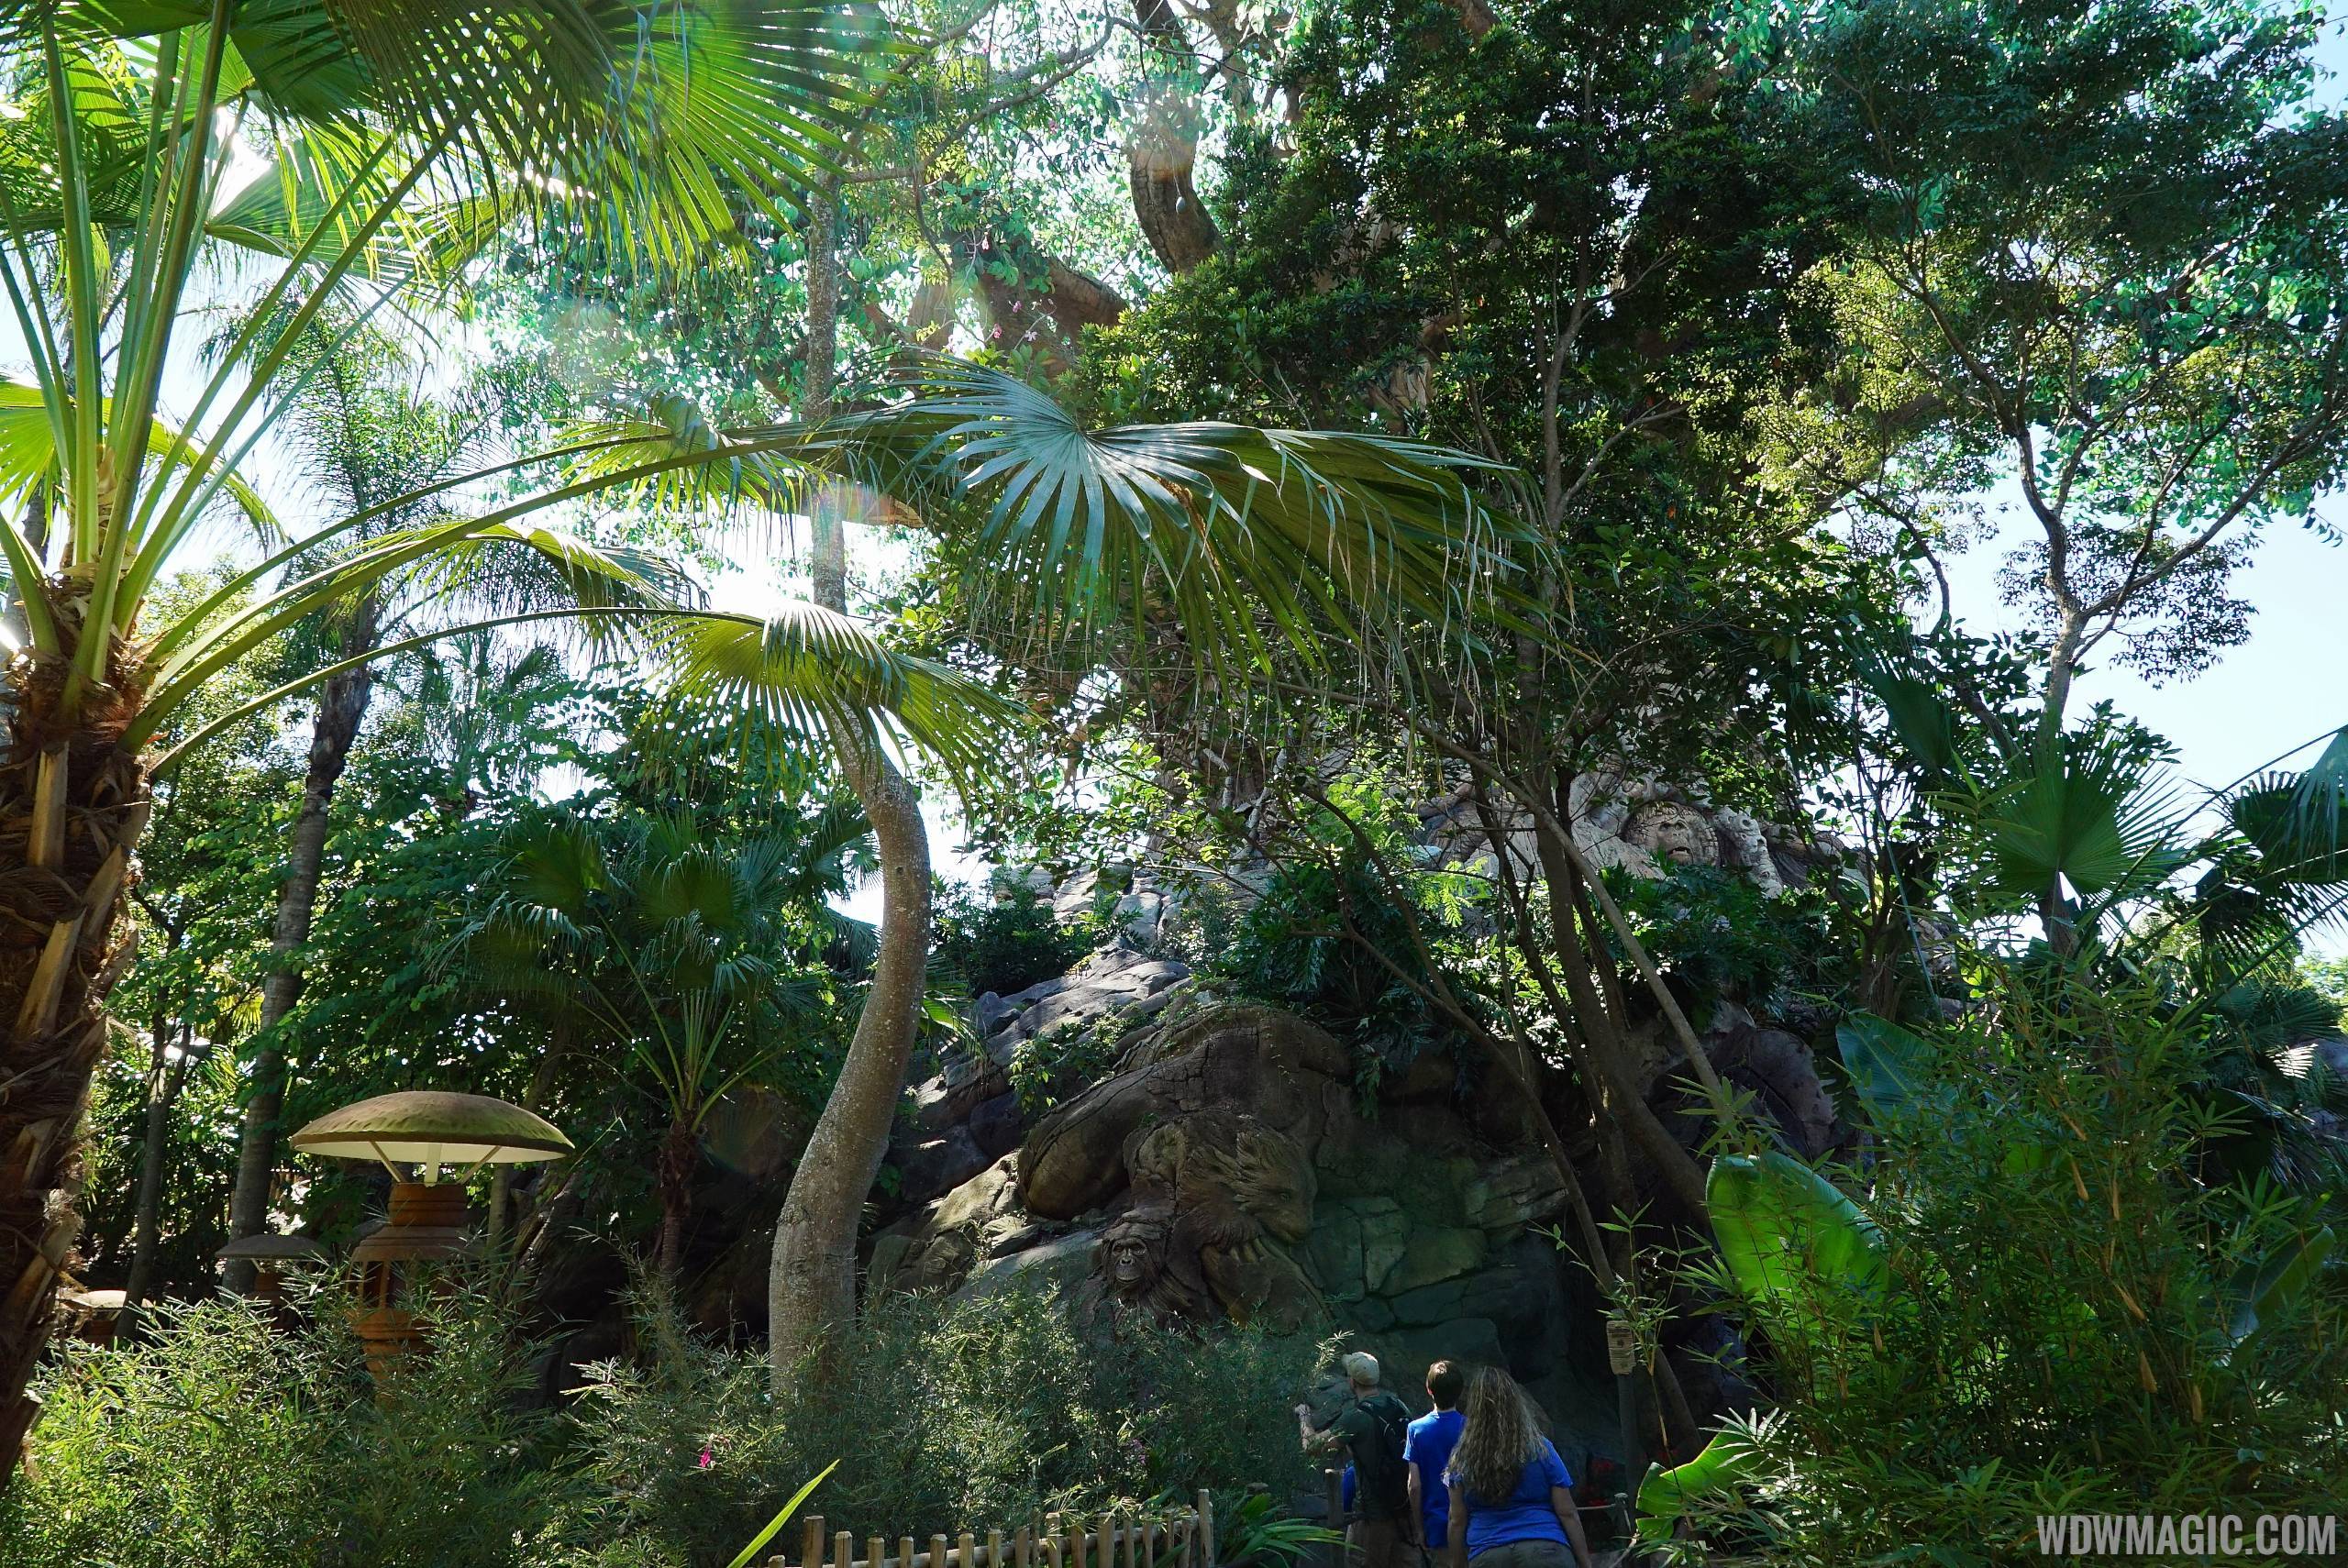 Overhead nets removed from around the Tree of Life at Disney's Animal Kingdom